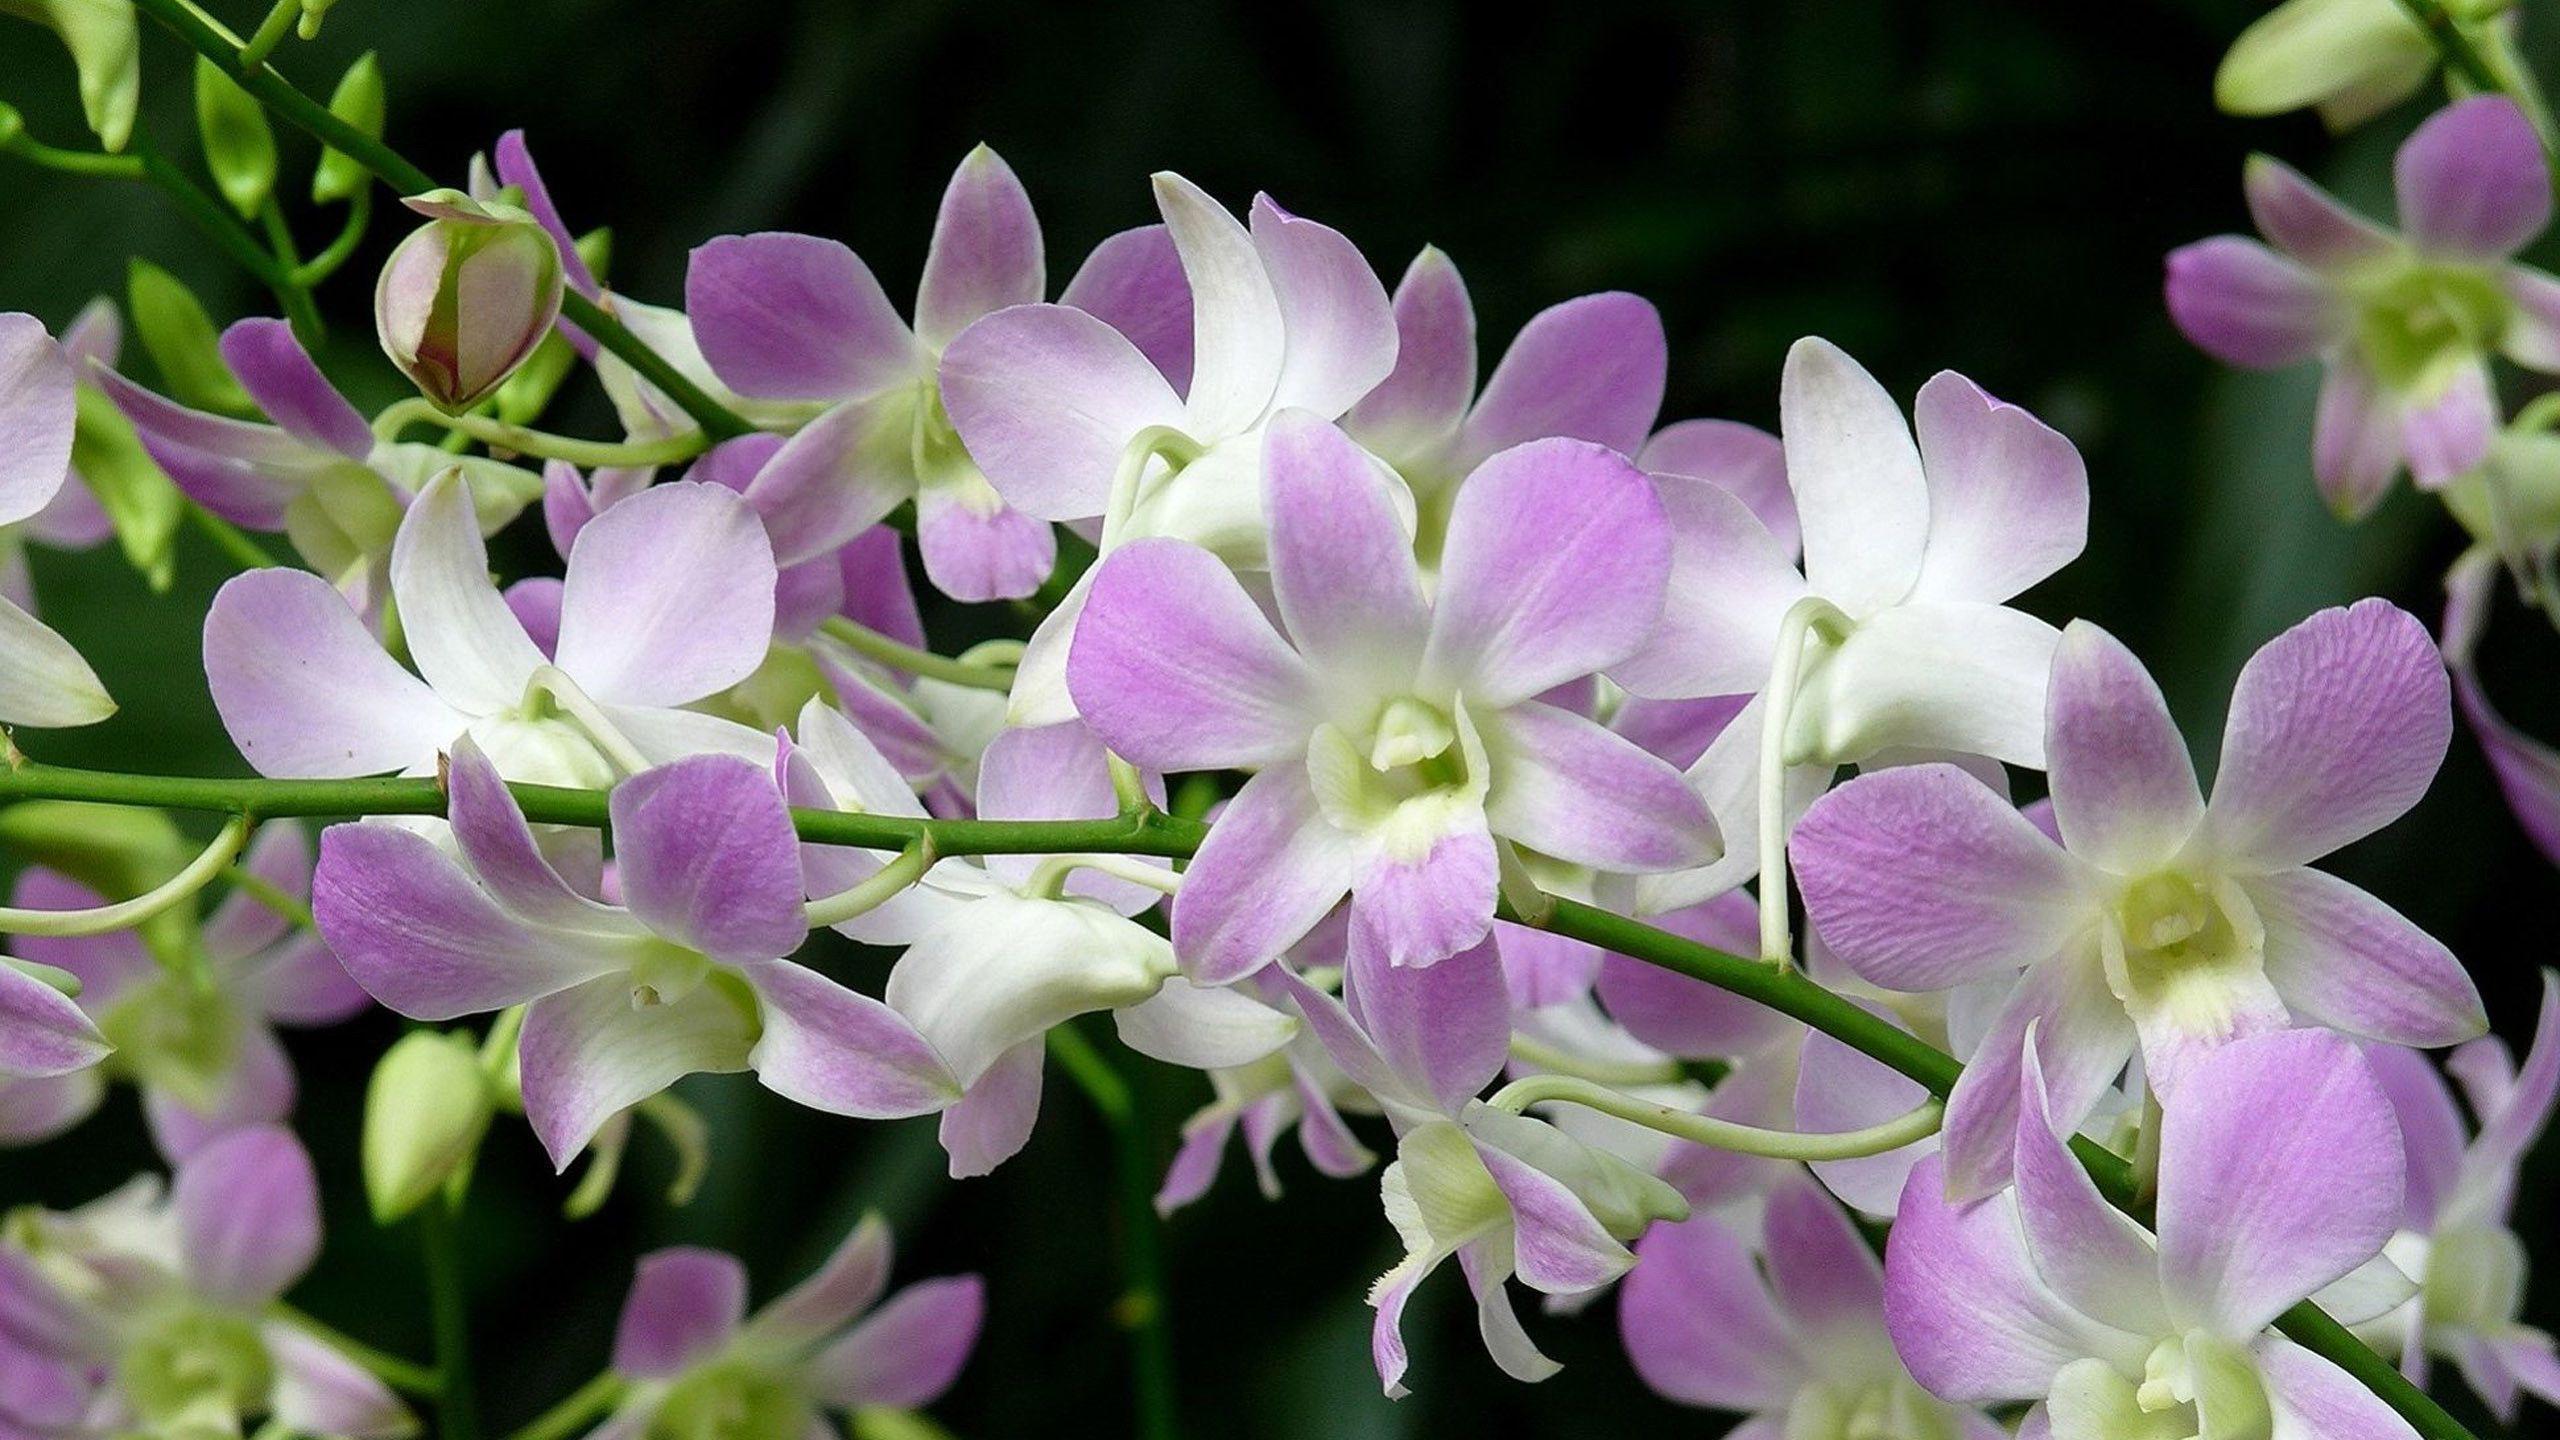 Top Orchid Flower Wallpaper Free Download of all time The ultimate guide 